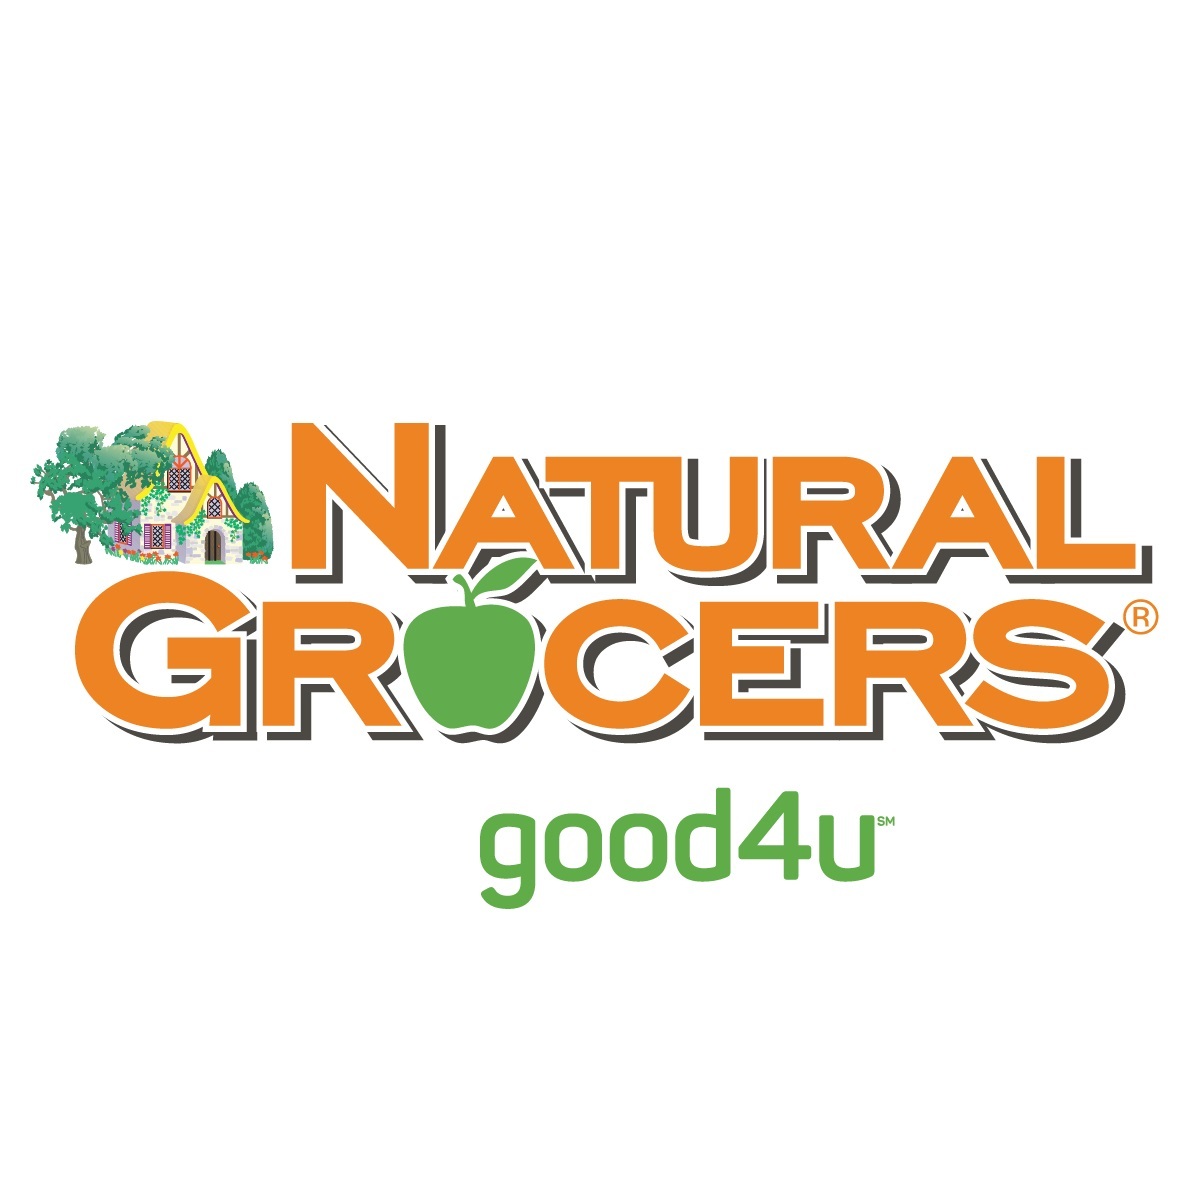 Natural Grocers To Open 40th Colorado Store In Pagosa Springs